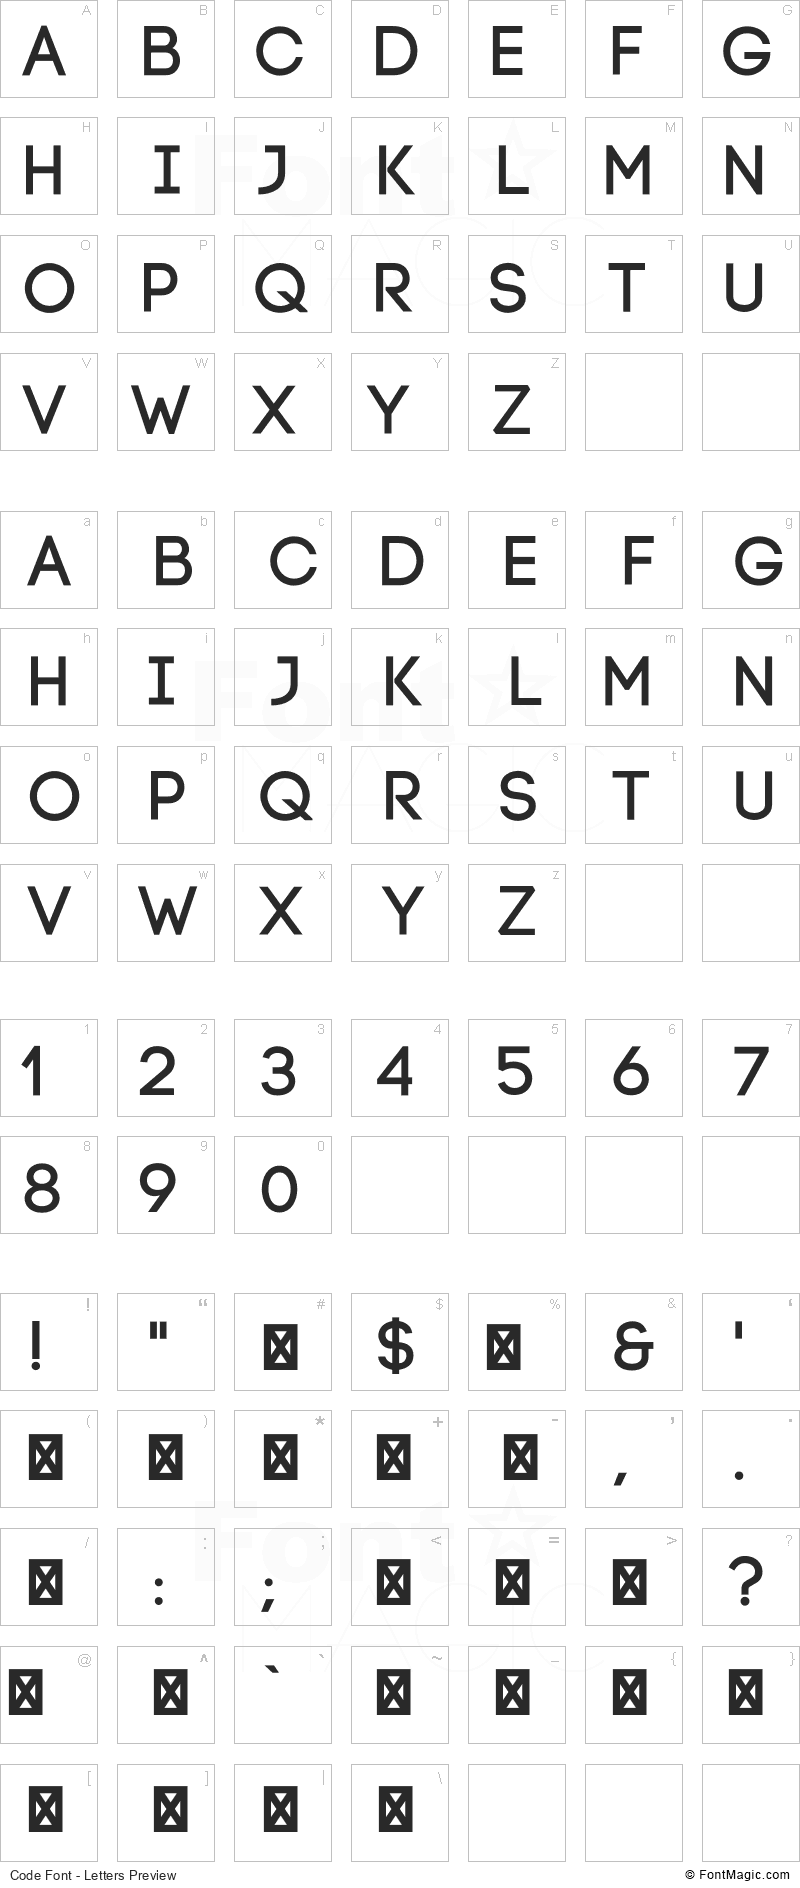 Code Font - All Latters Preview Chart